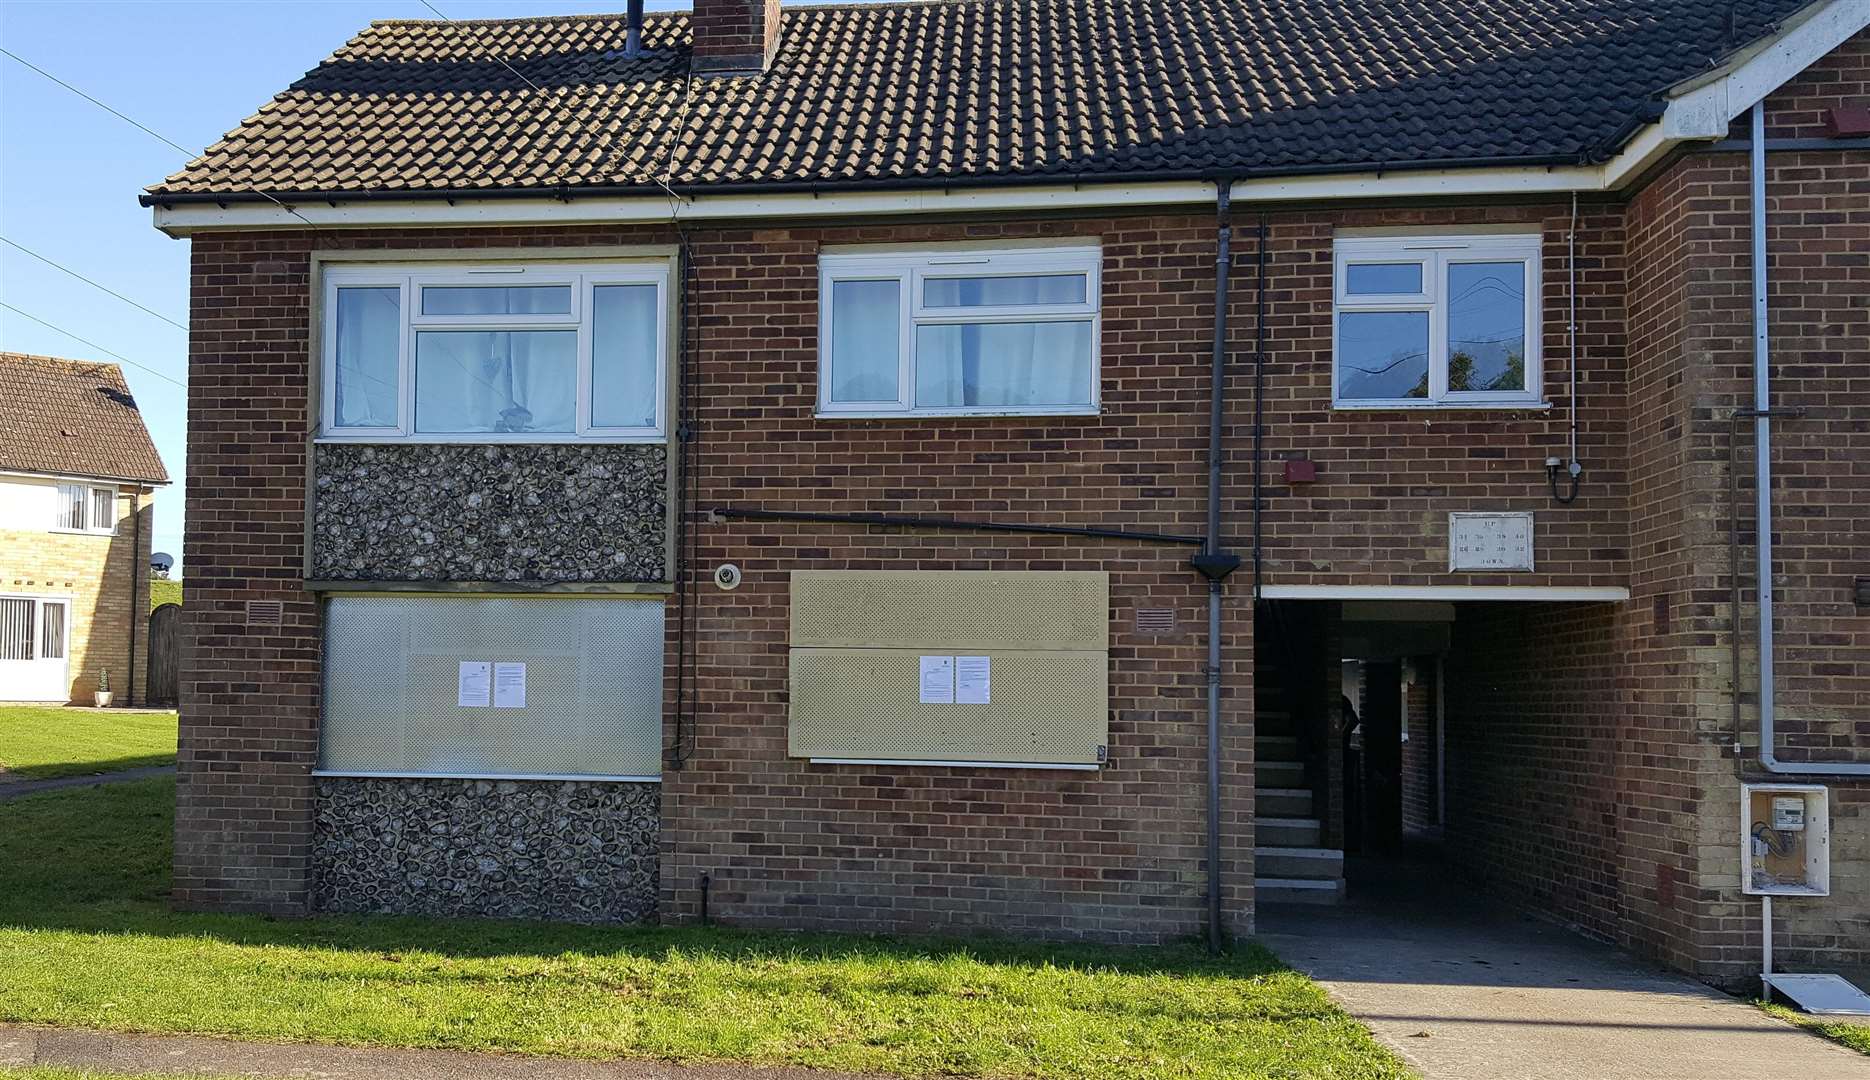 The flat has been boarded up, with police signs explaining the court order and the legal consequences of entering